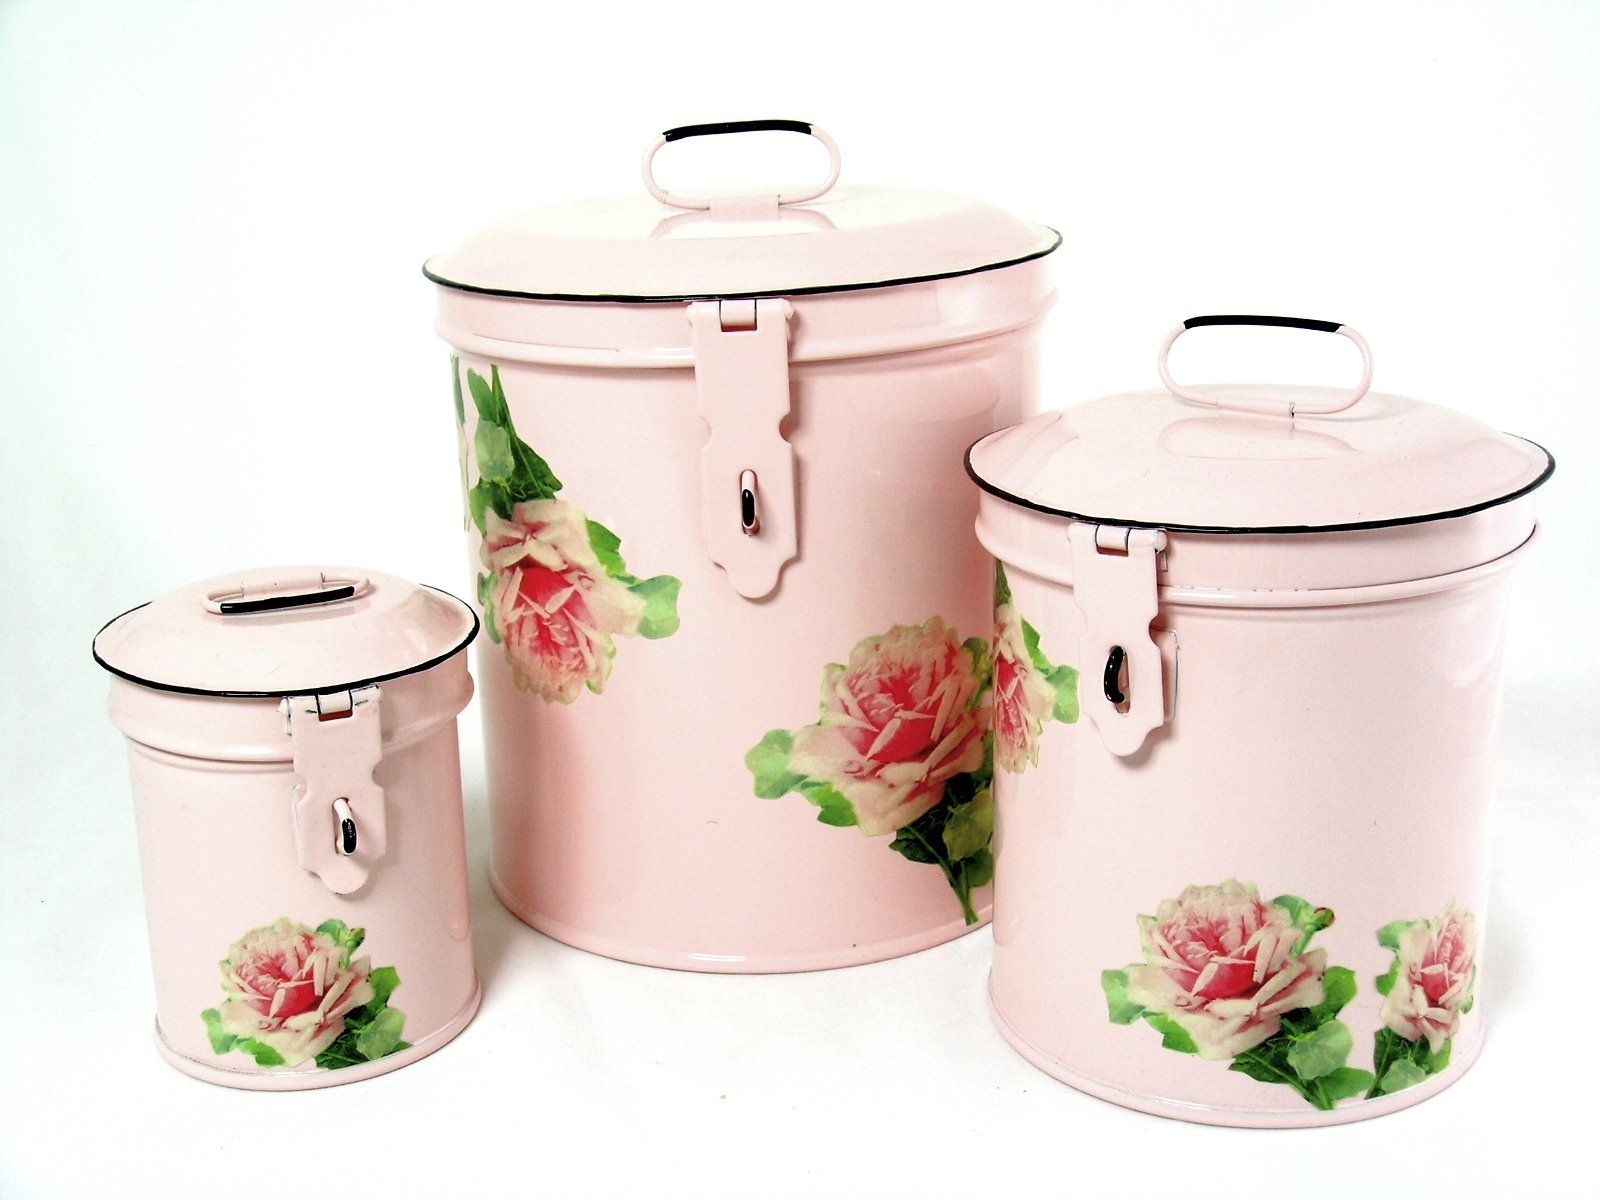 Retro Vintage Canister Set ~ Kitchen Storage Canisters E8 Decorative Containers ~ Shabby Chic Pink Enamel with Shabby Antique Rose